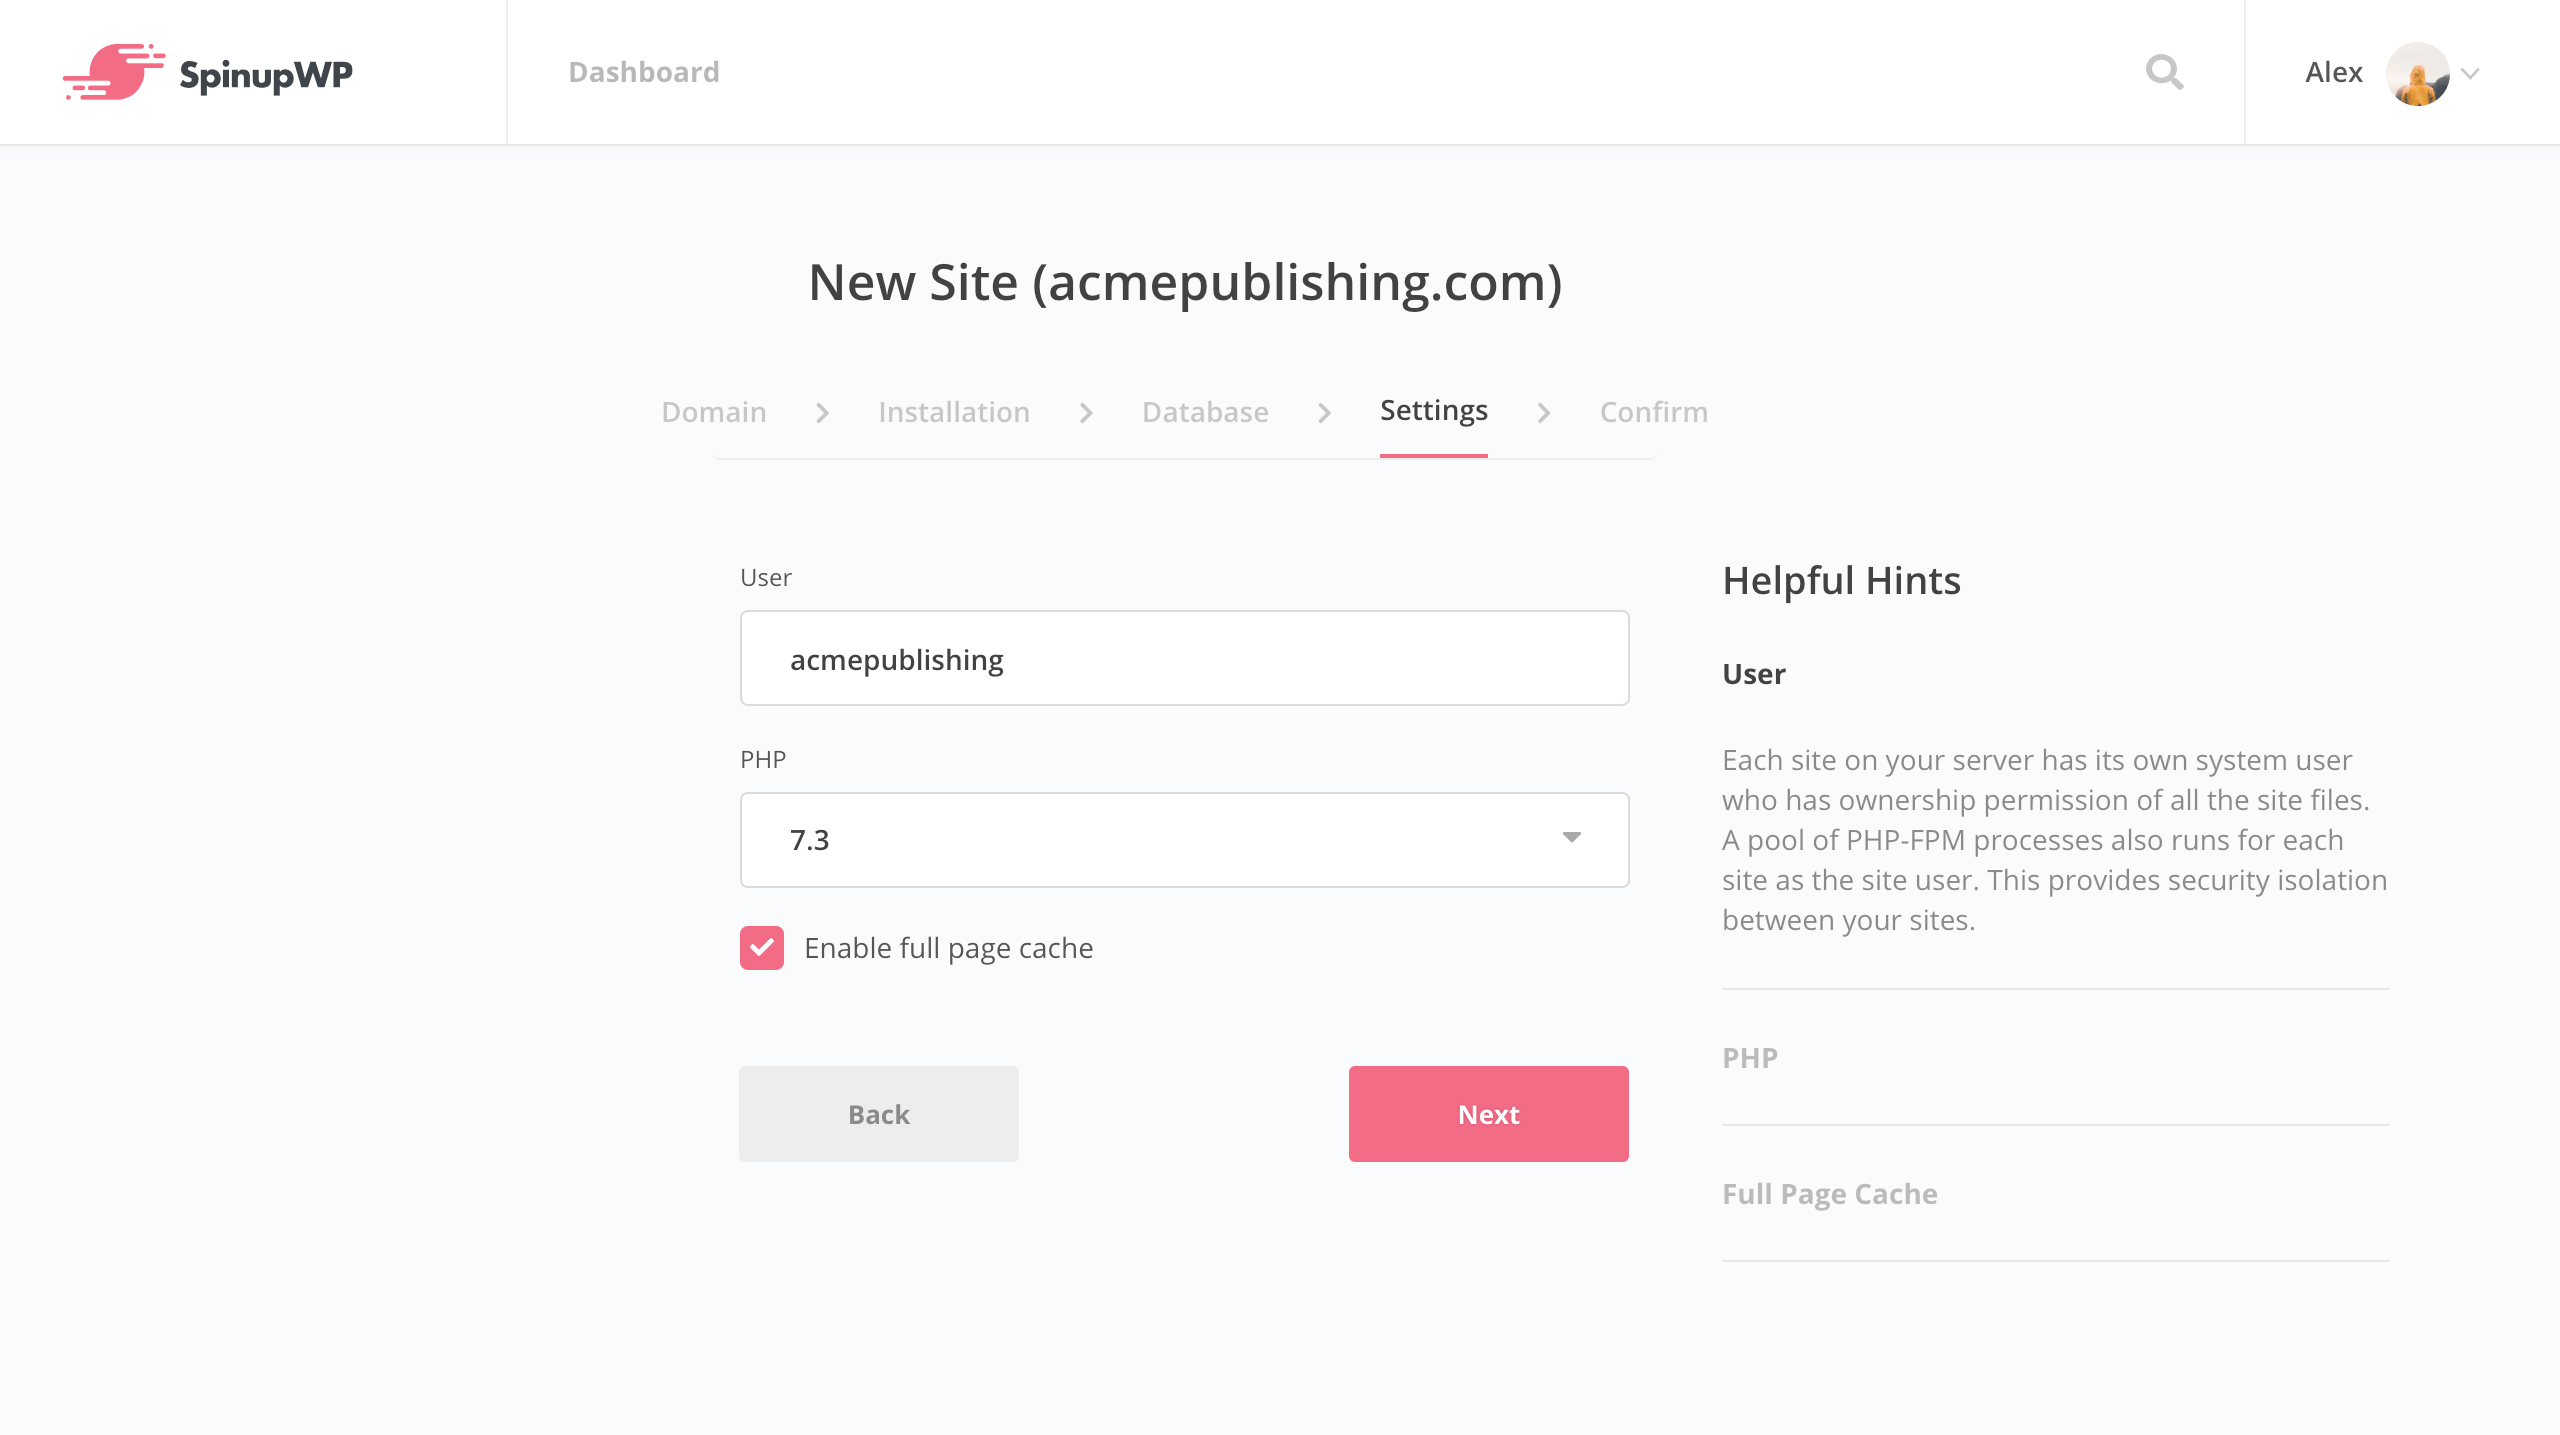 SpinupWP new site settings